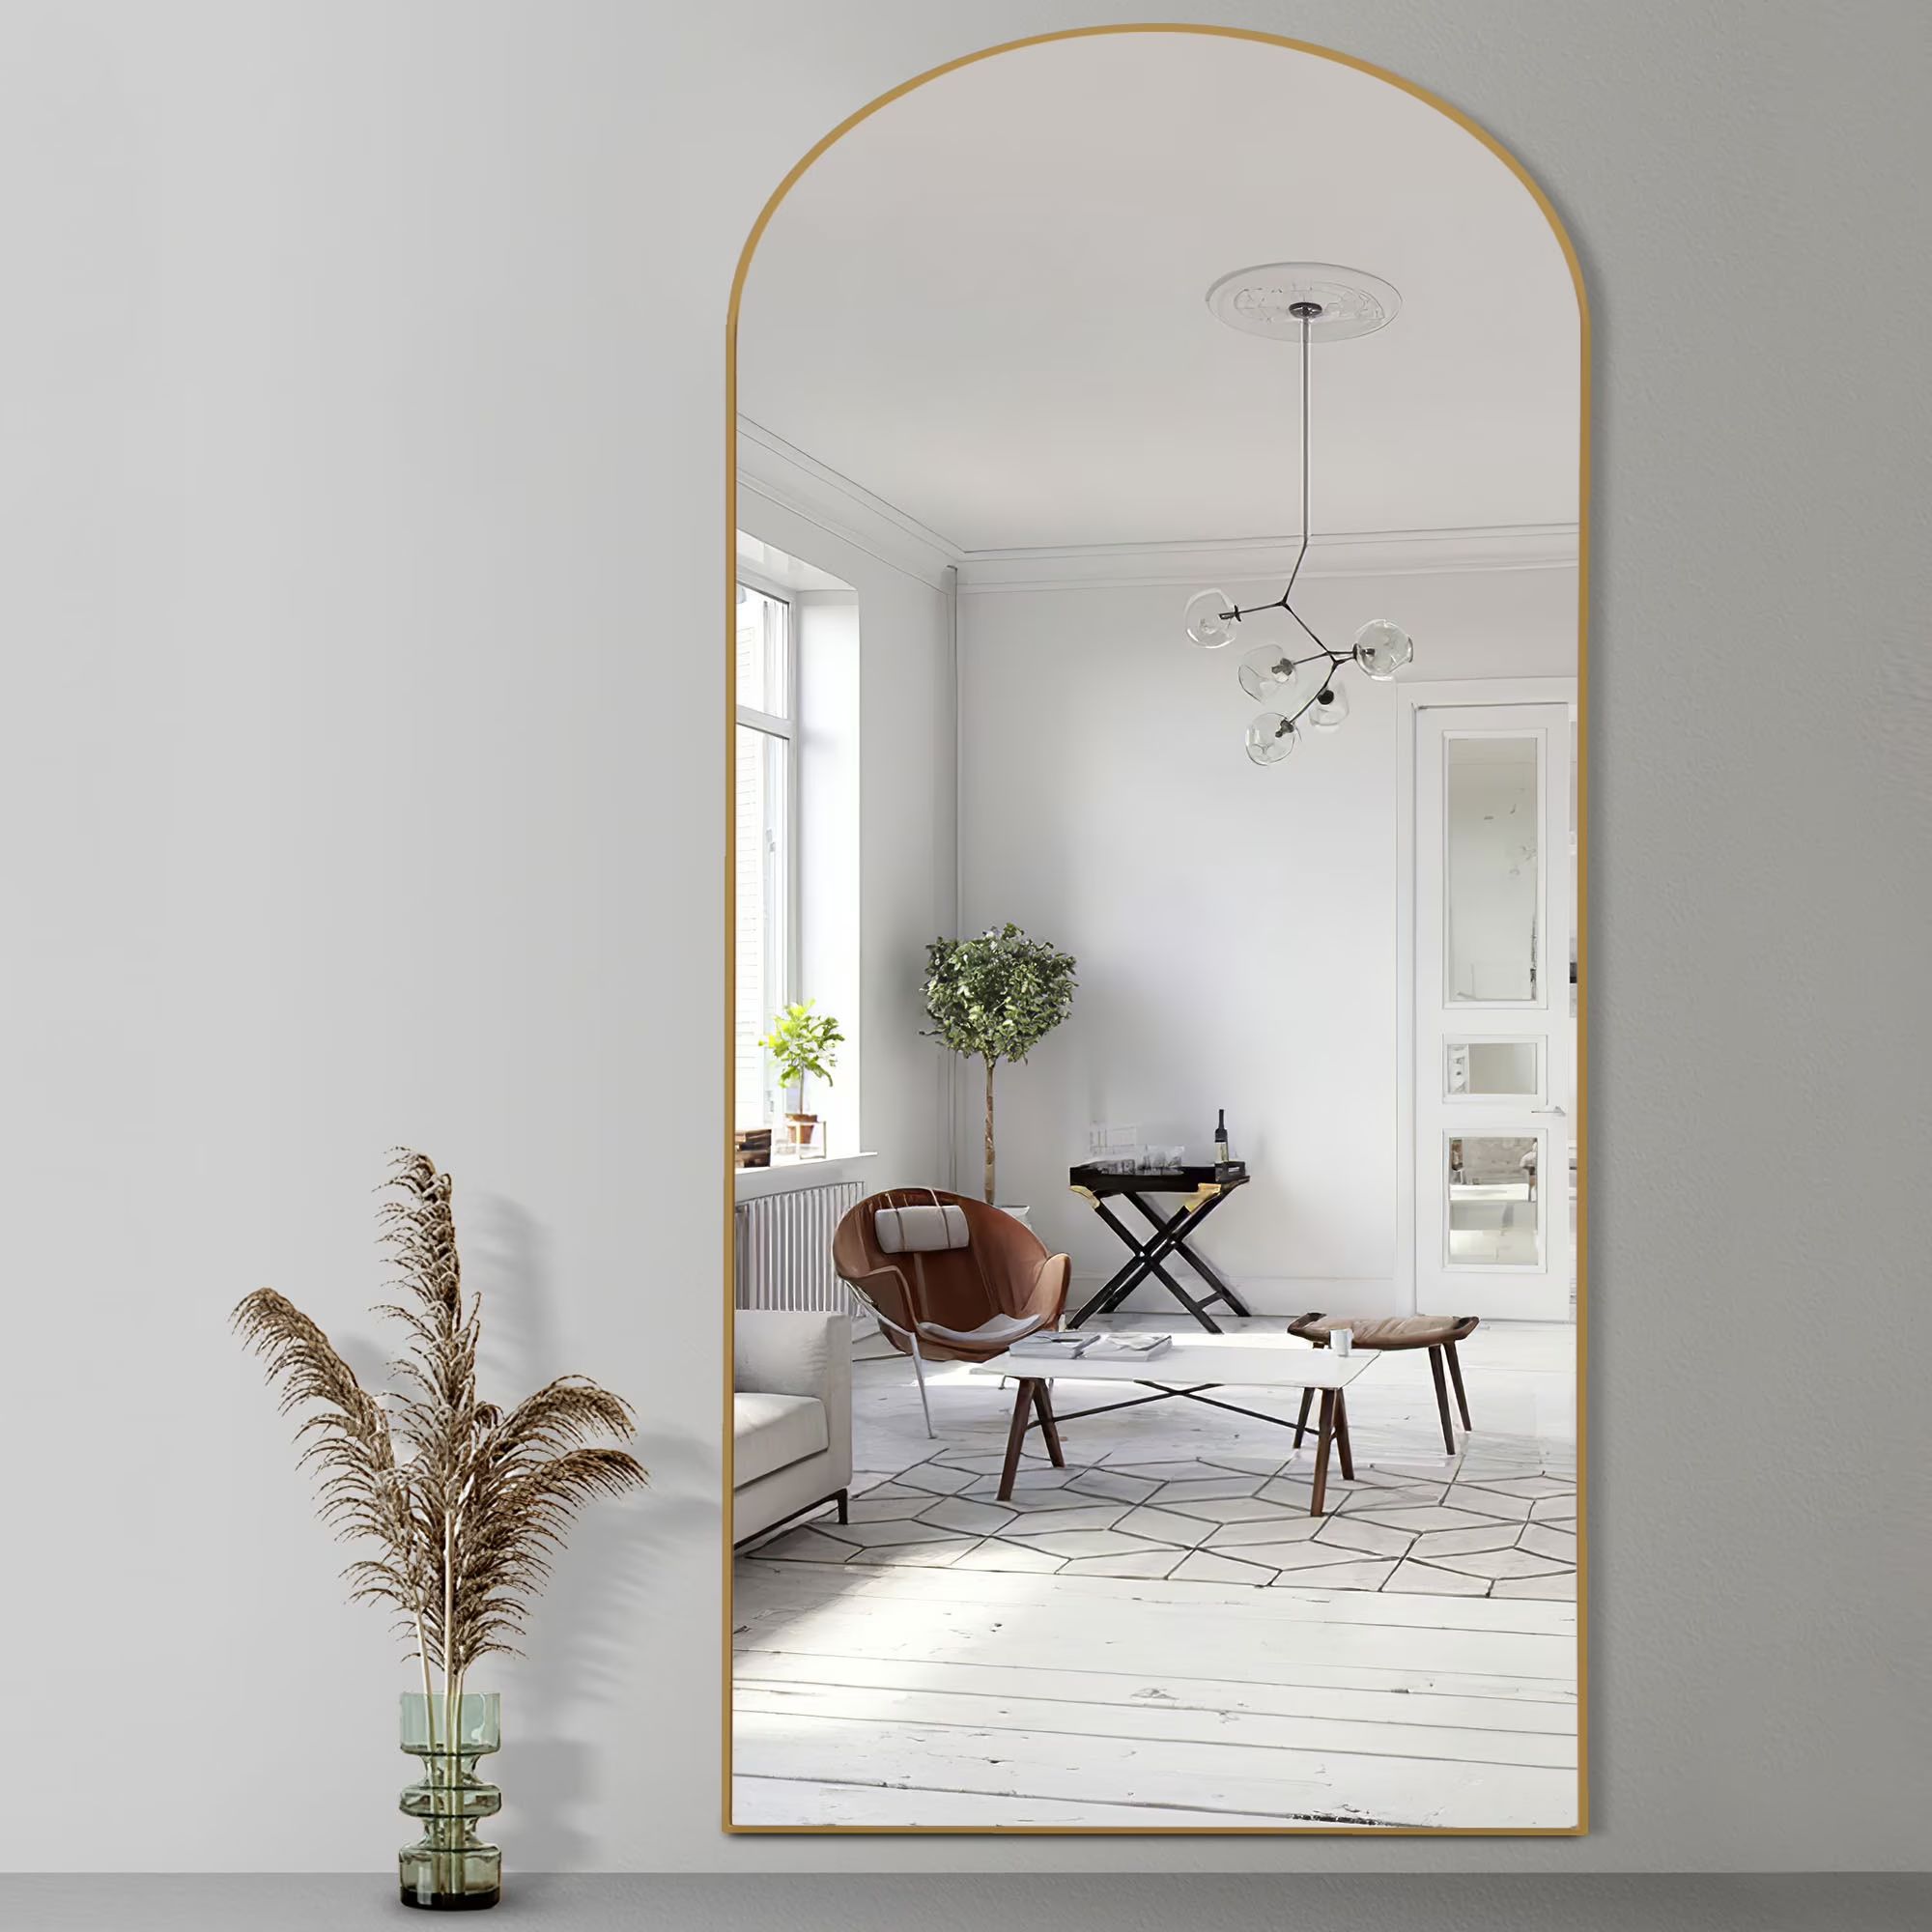 NeuType 71"x31" Arched Full Length Mirror Floor Mirror with Stand Gold | Walmart (US)